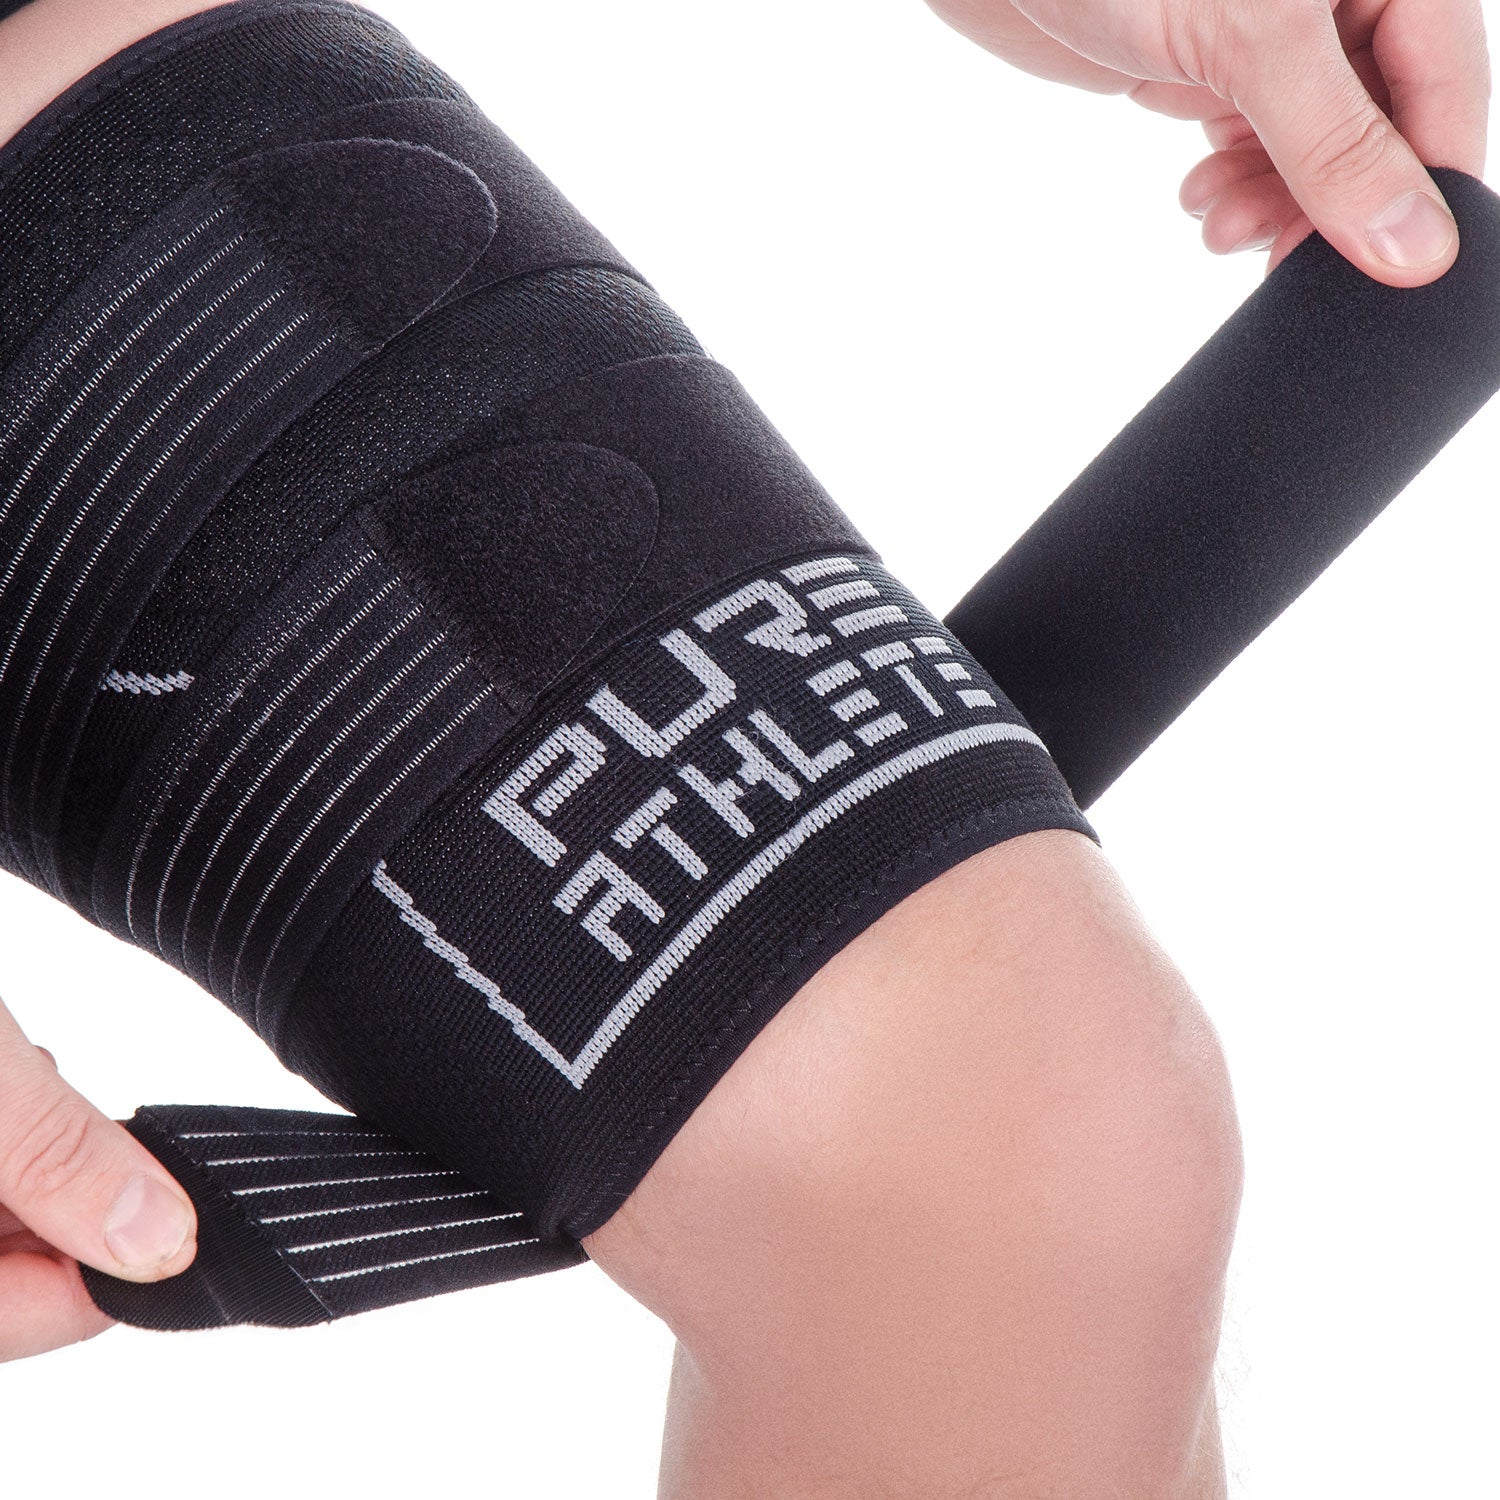 Thigh Compression Sleeve with Adjustable Strap